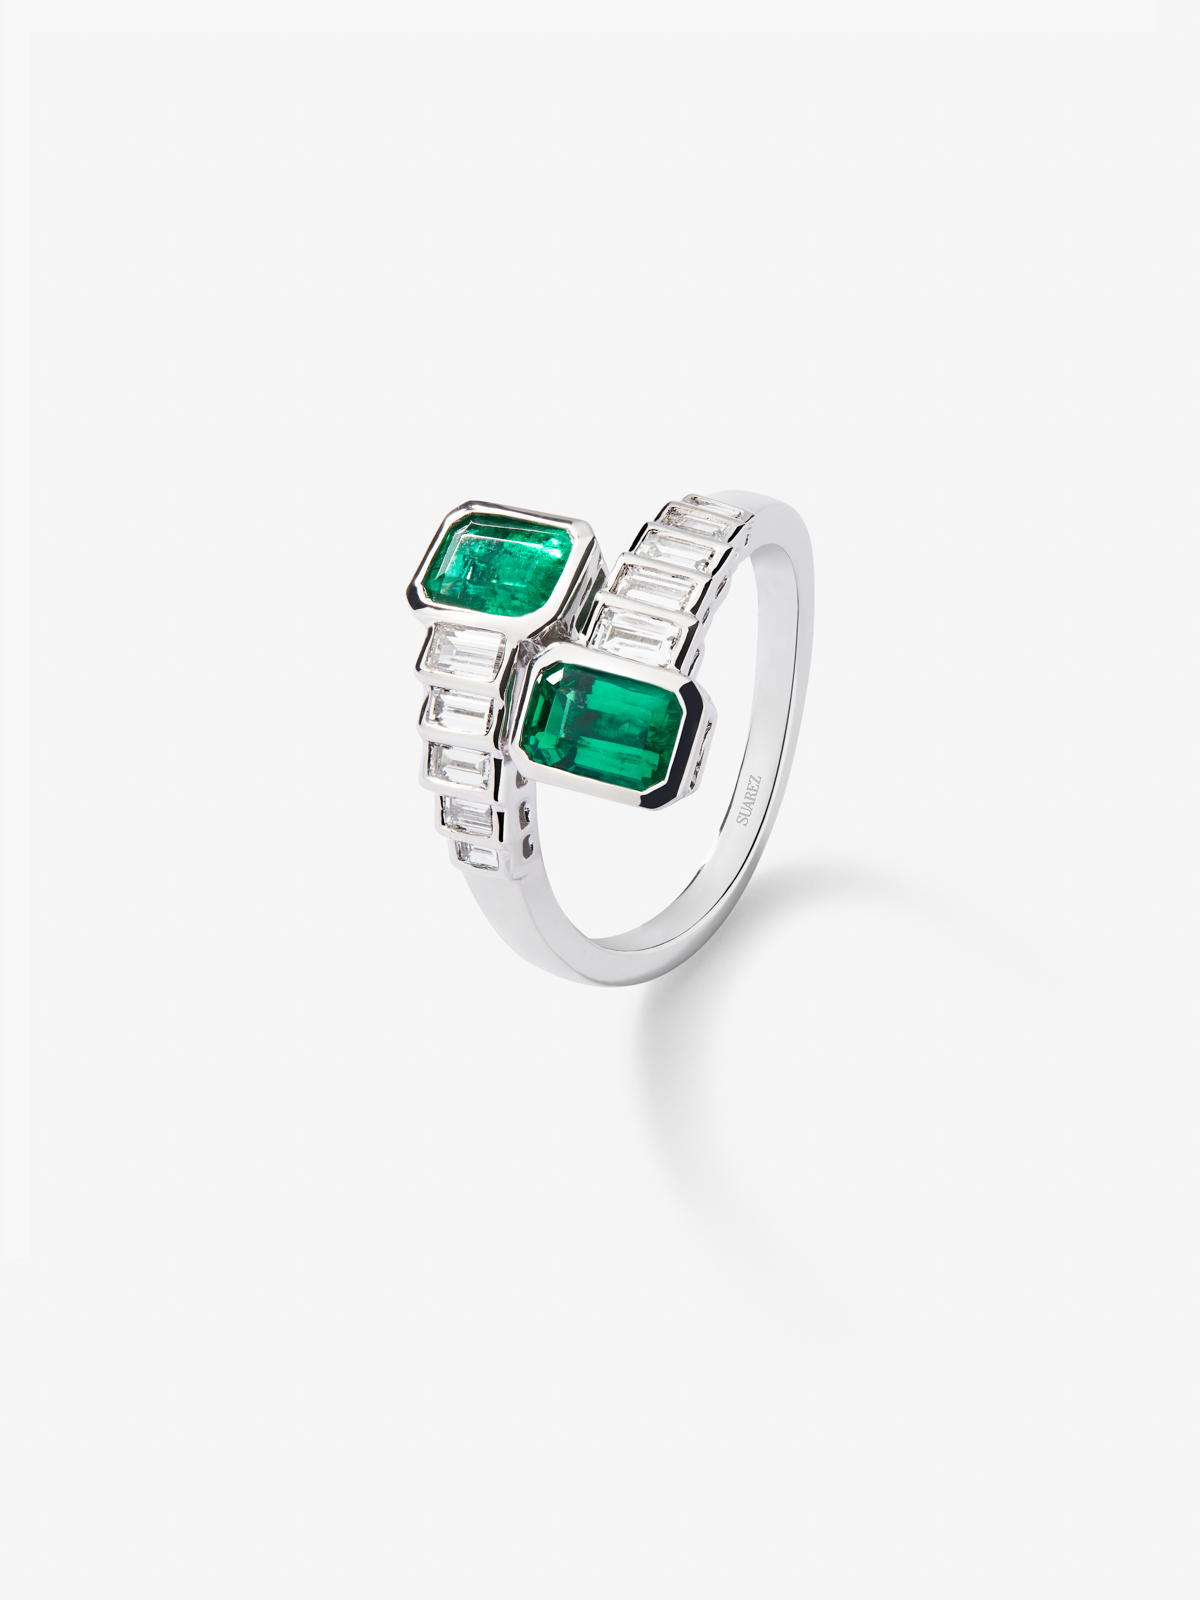 You and I 18k White Gold Ring with Green Emeralds in Octagonal Size 1.28 cts and white diamonds in 0.57 cts baggos